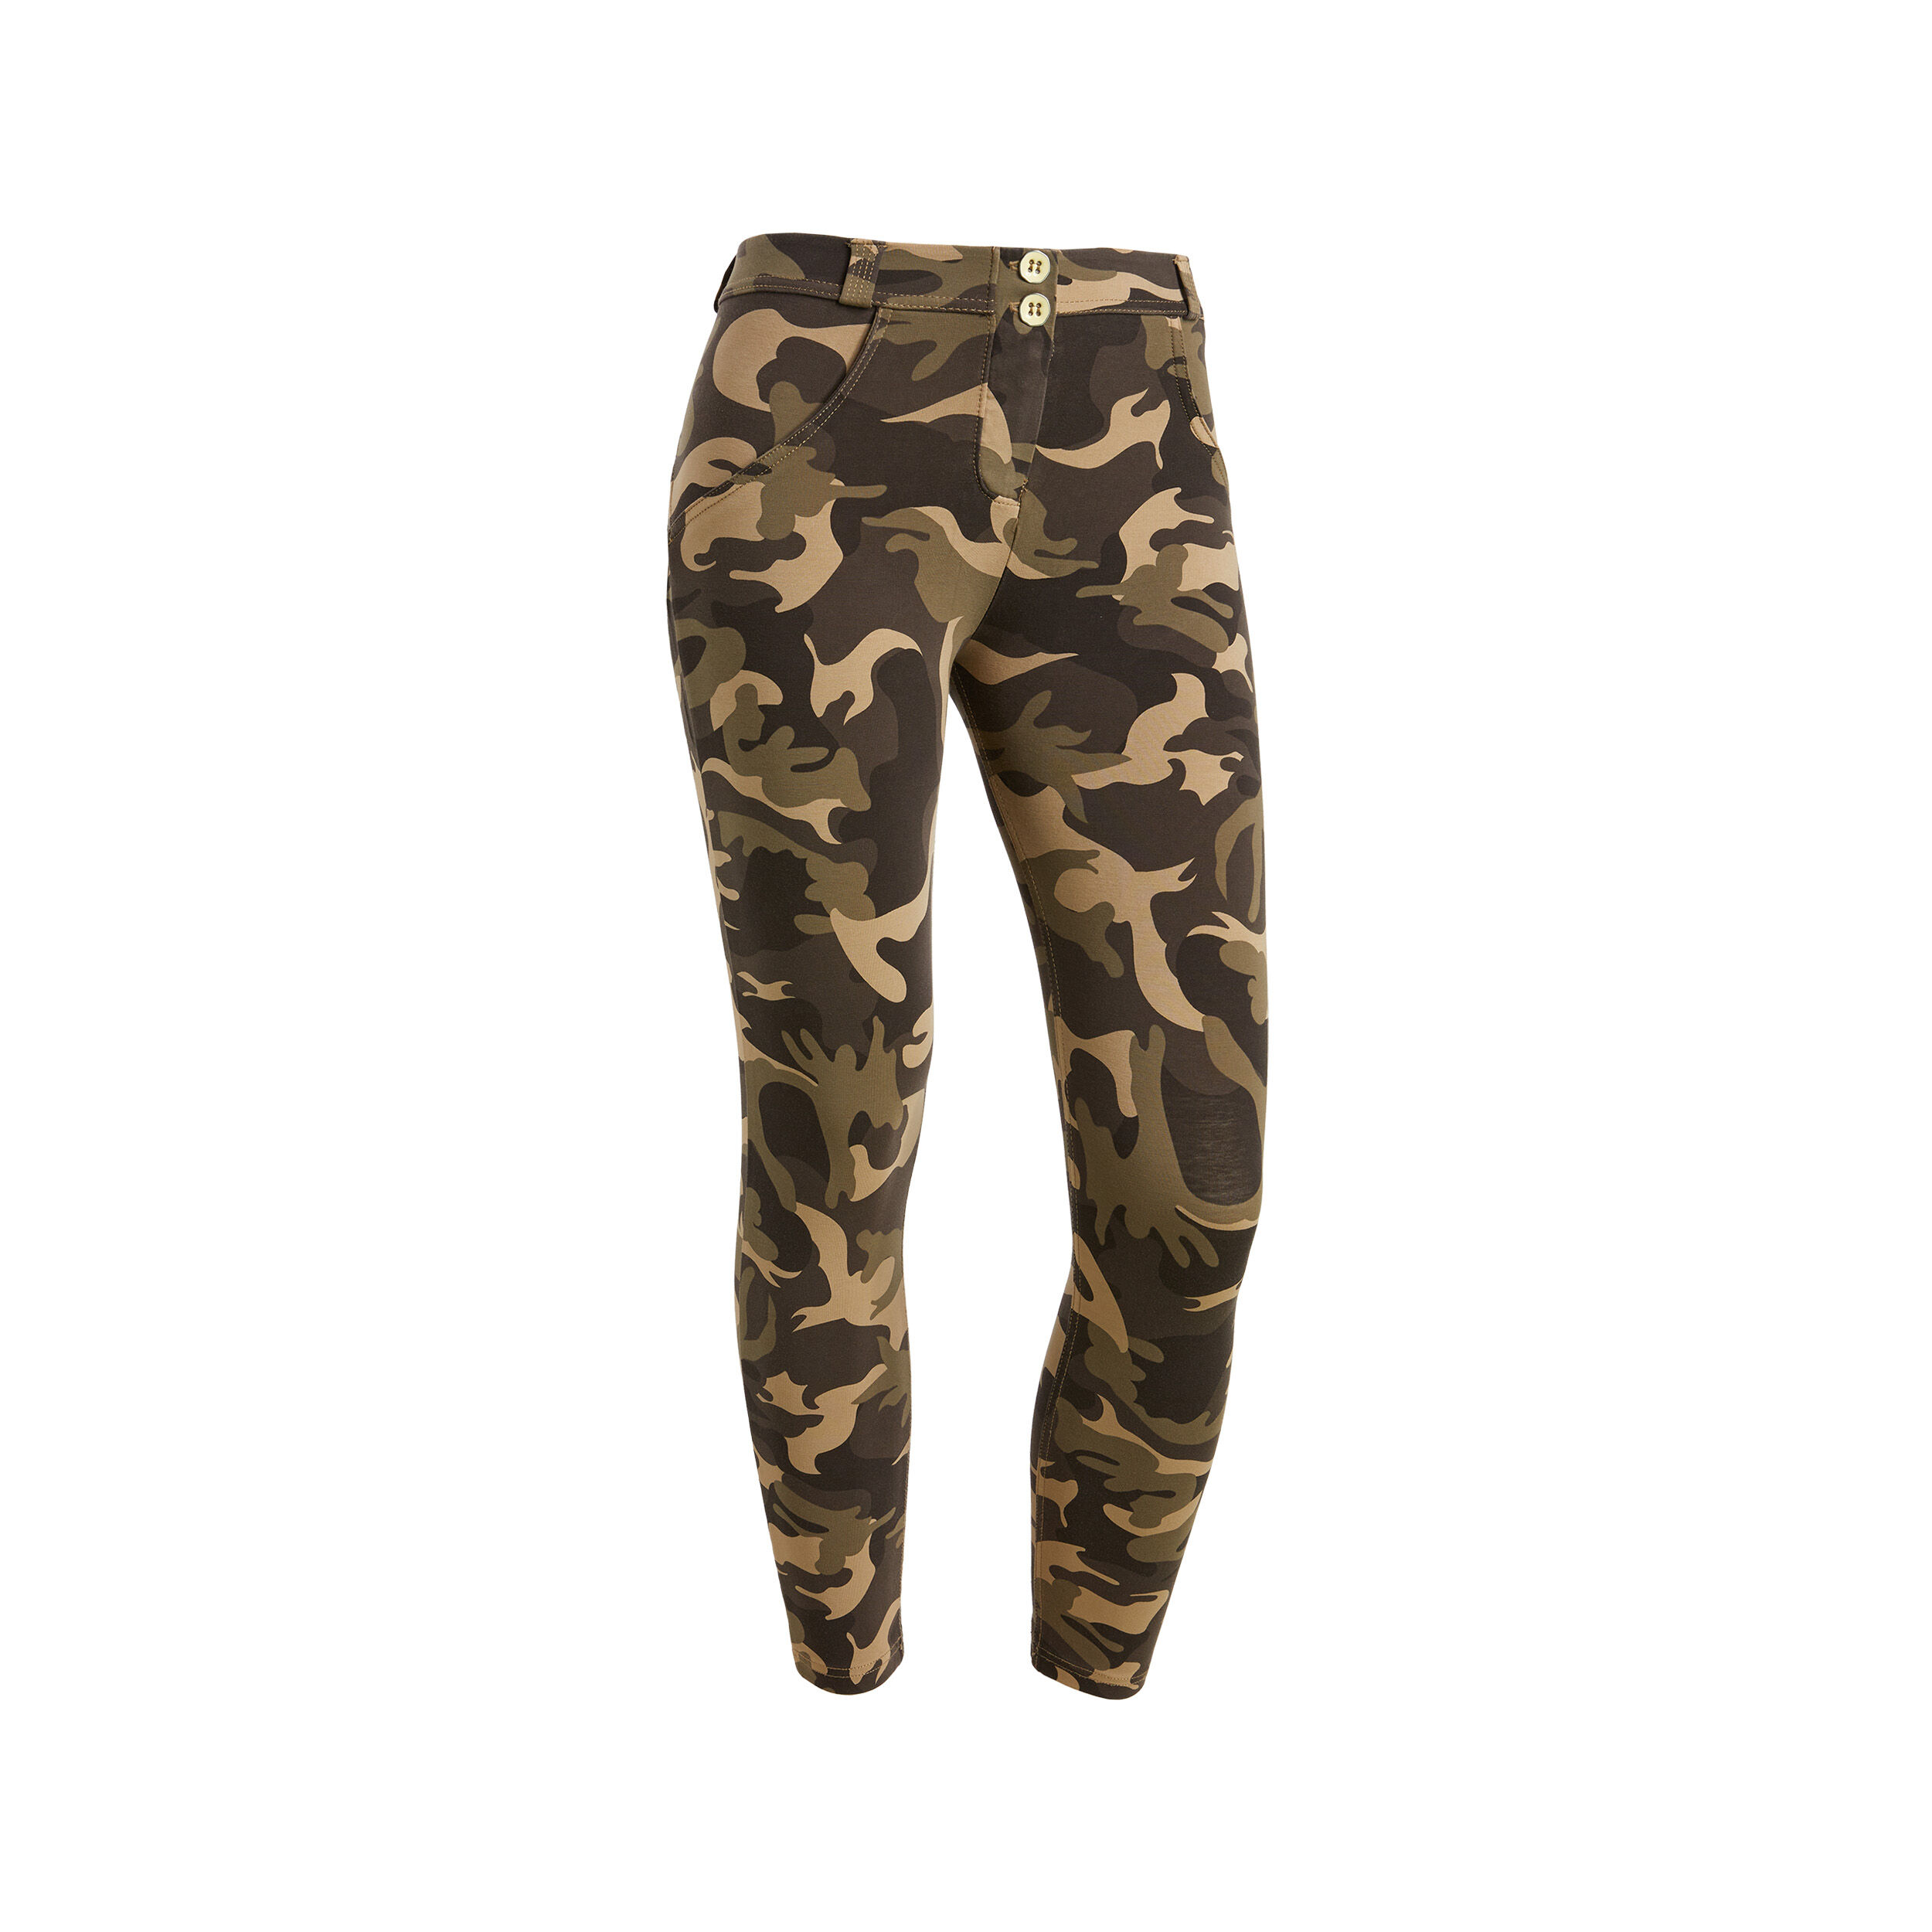 Freddy Pantaloni push up WR.UP® 7/8 clessidra superskinny camouflage Marrone-Mimetico Donna Small